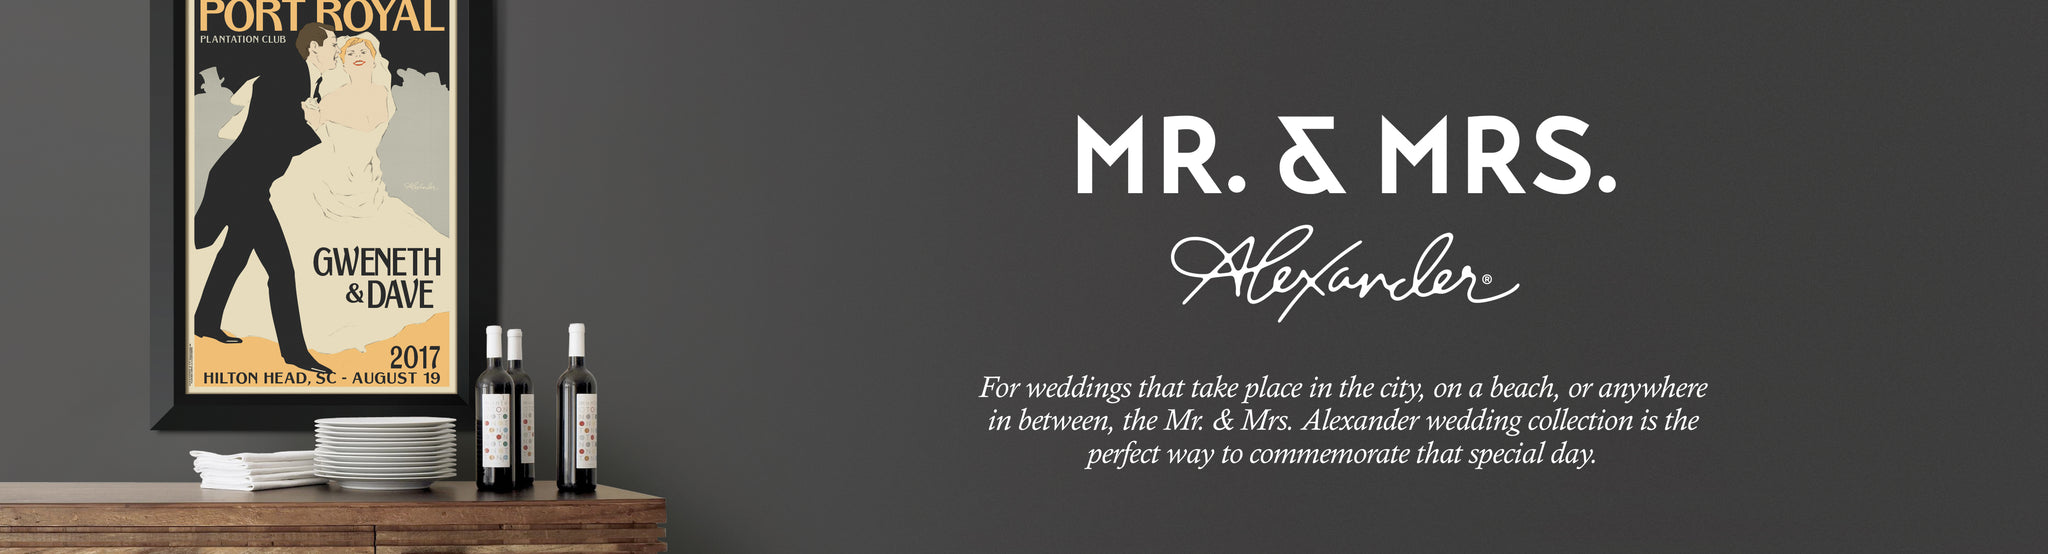 For weddings that take place in the city, on a beach, or anywhere in between, the Mr & Mrs Alexander wedding collection is the perfect way to commemorate that special day. 